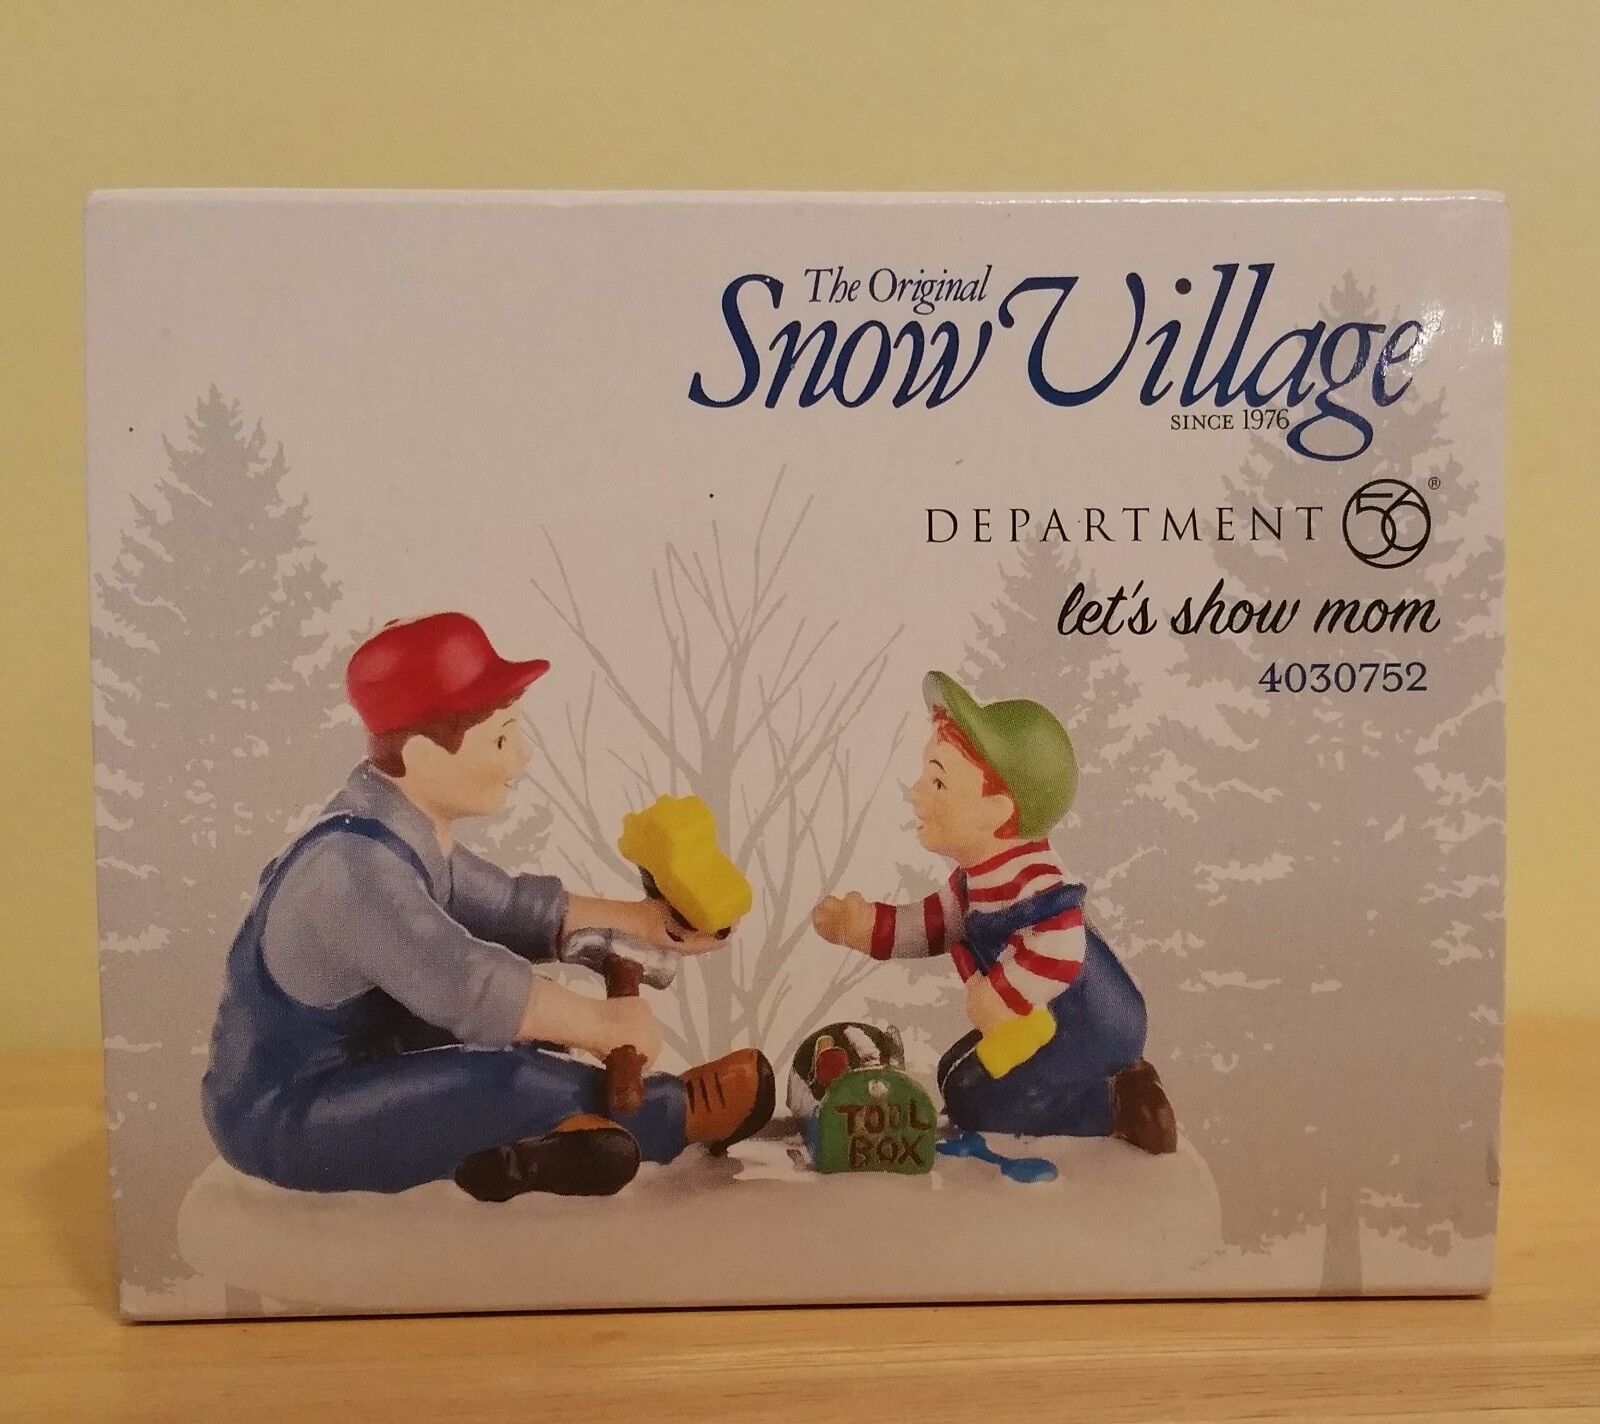 Department 56 Snow Village Lets Show Mom 4030752 Accessory 2013 New in Box 